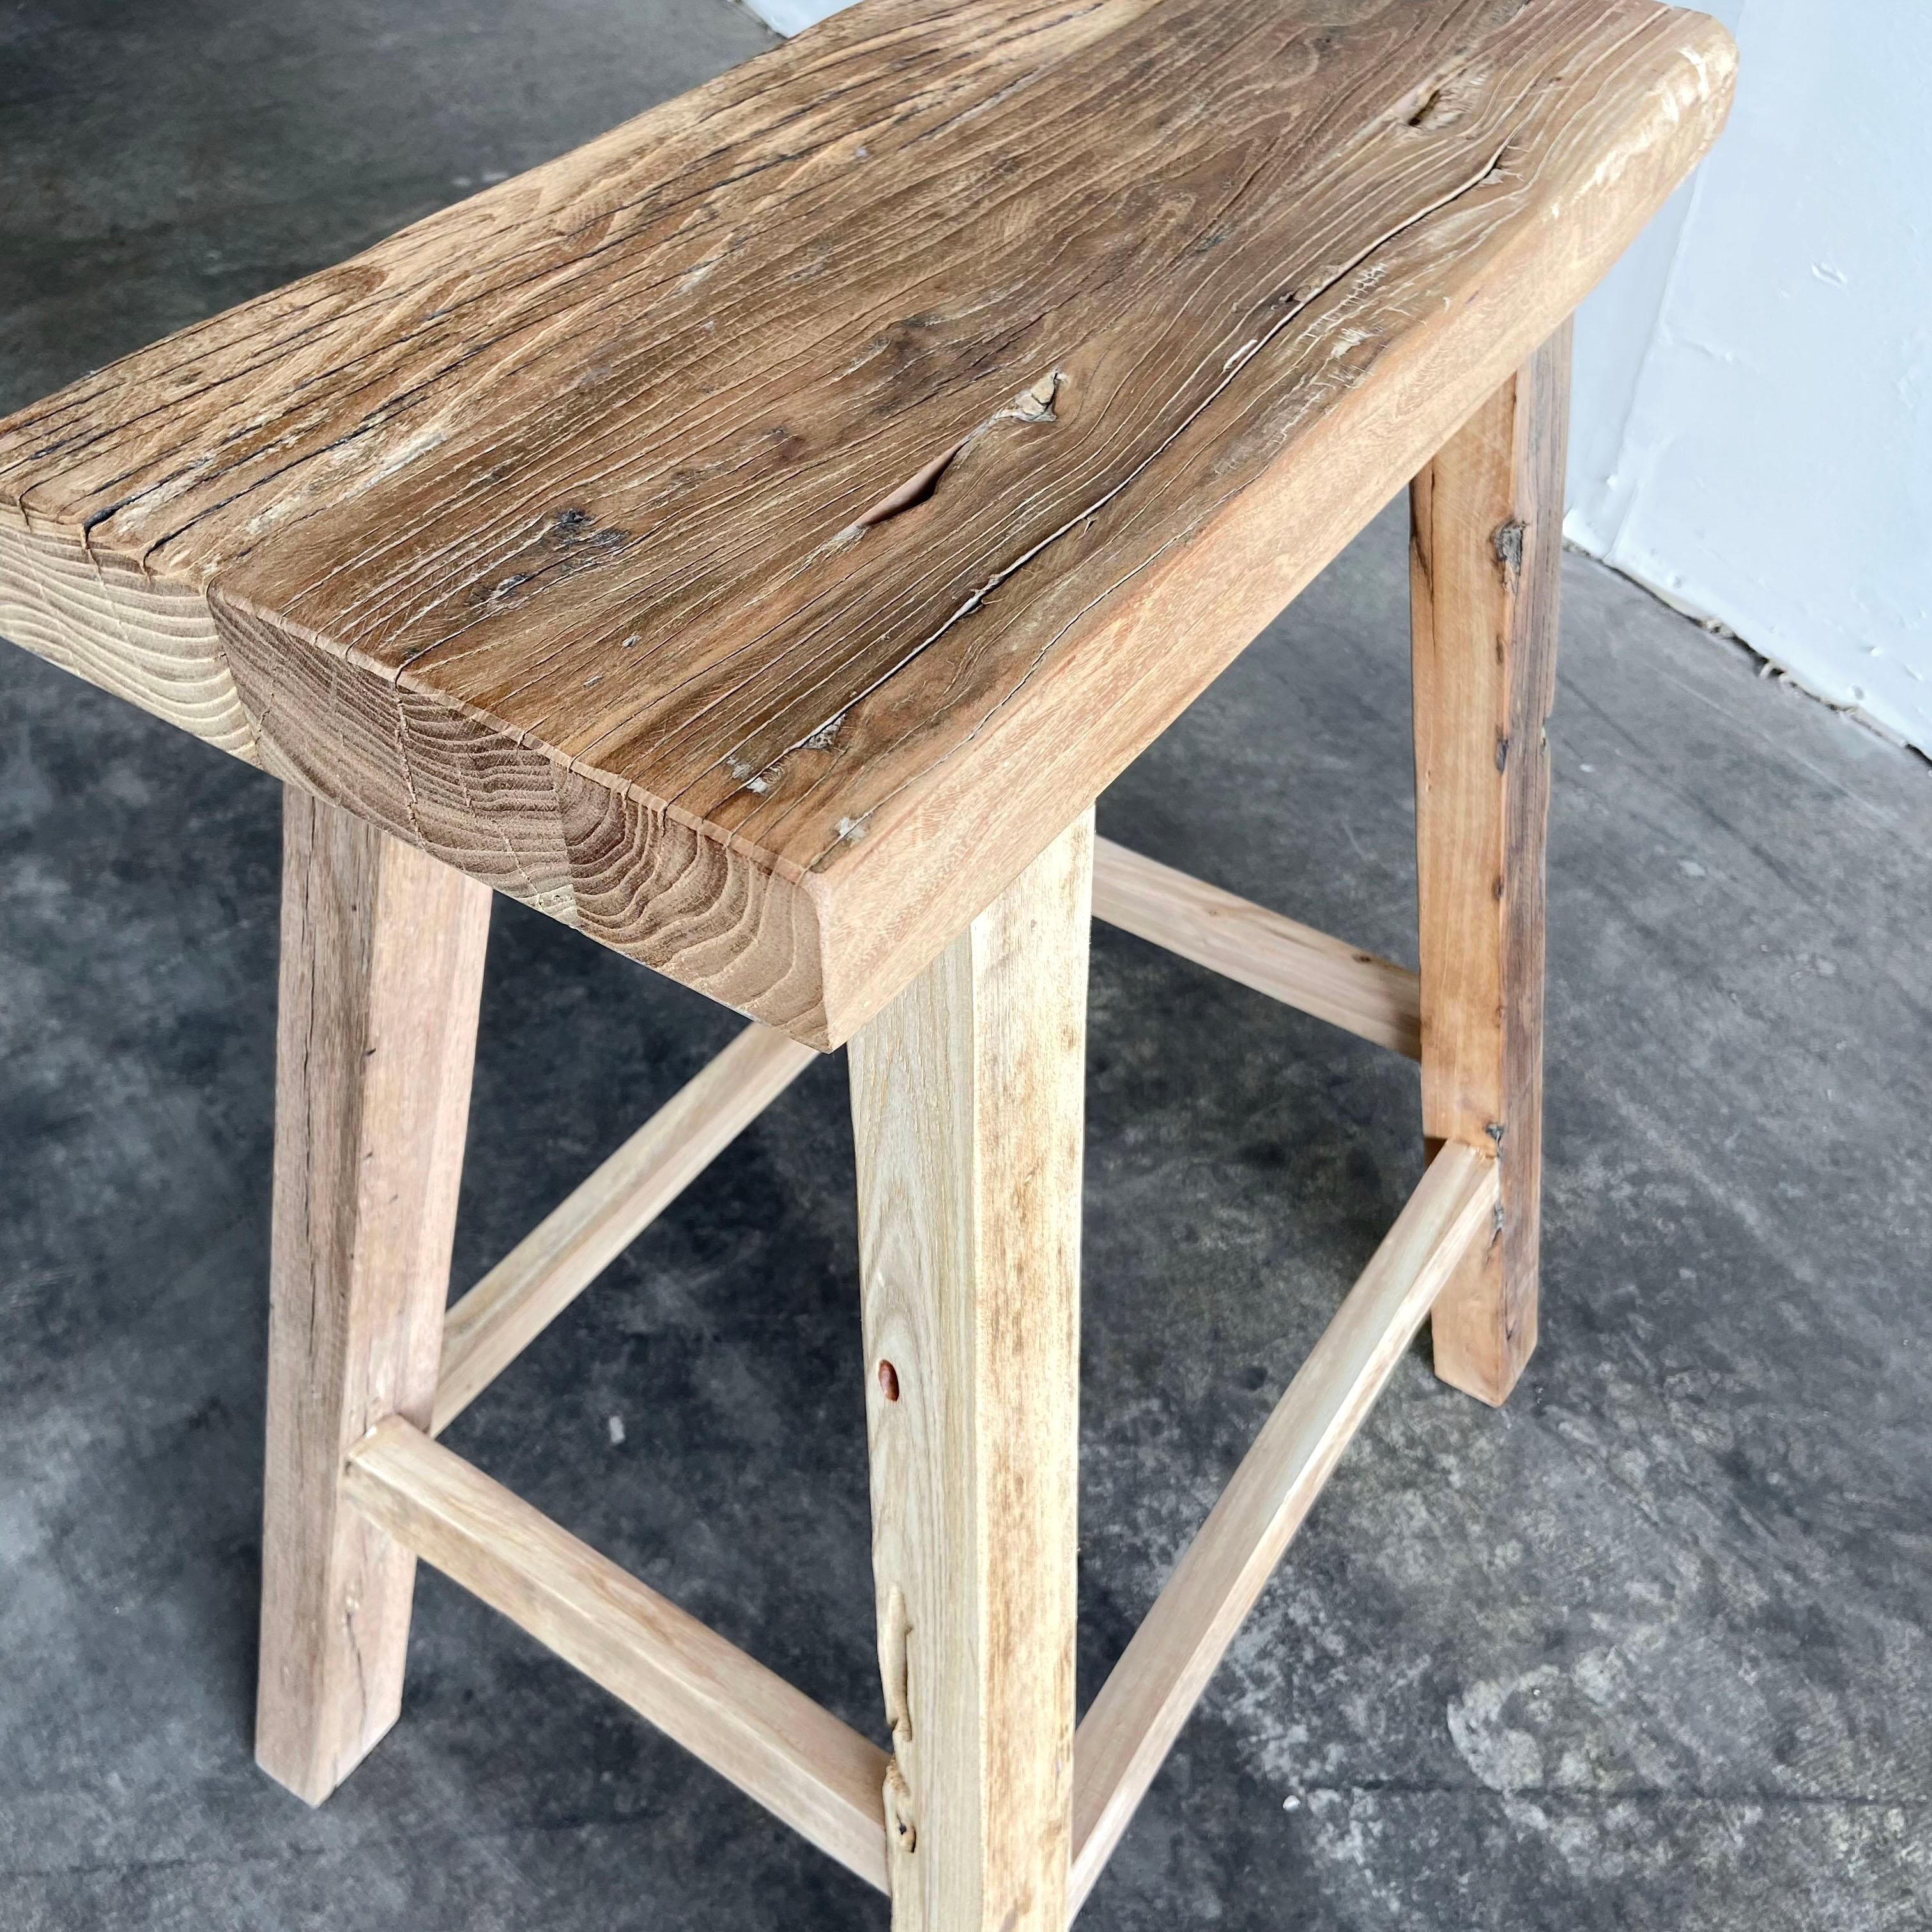 Vintage Elm Wood Stool or Pedestal In Good Condition For Sale In Brea, CA